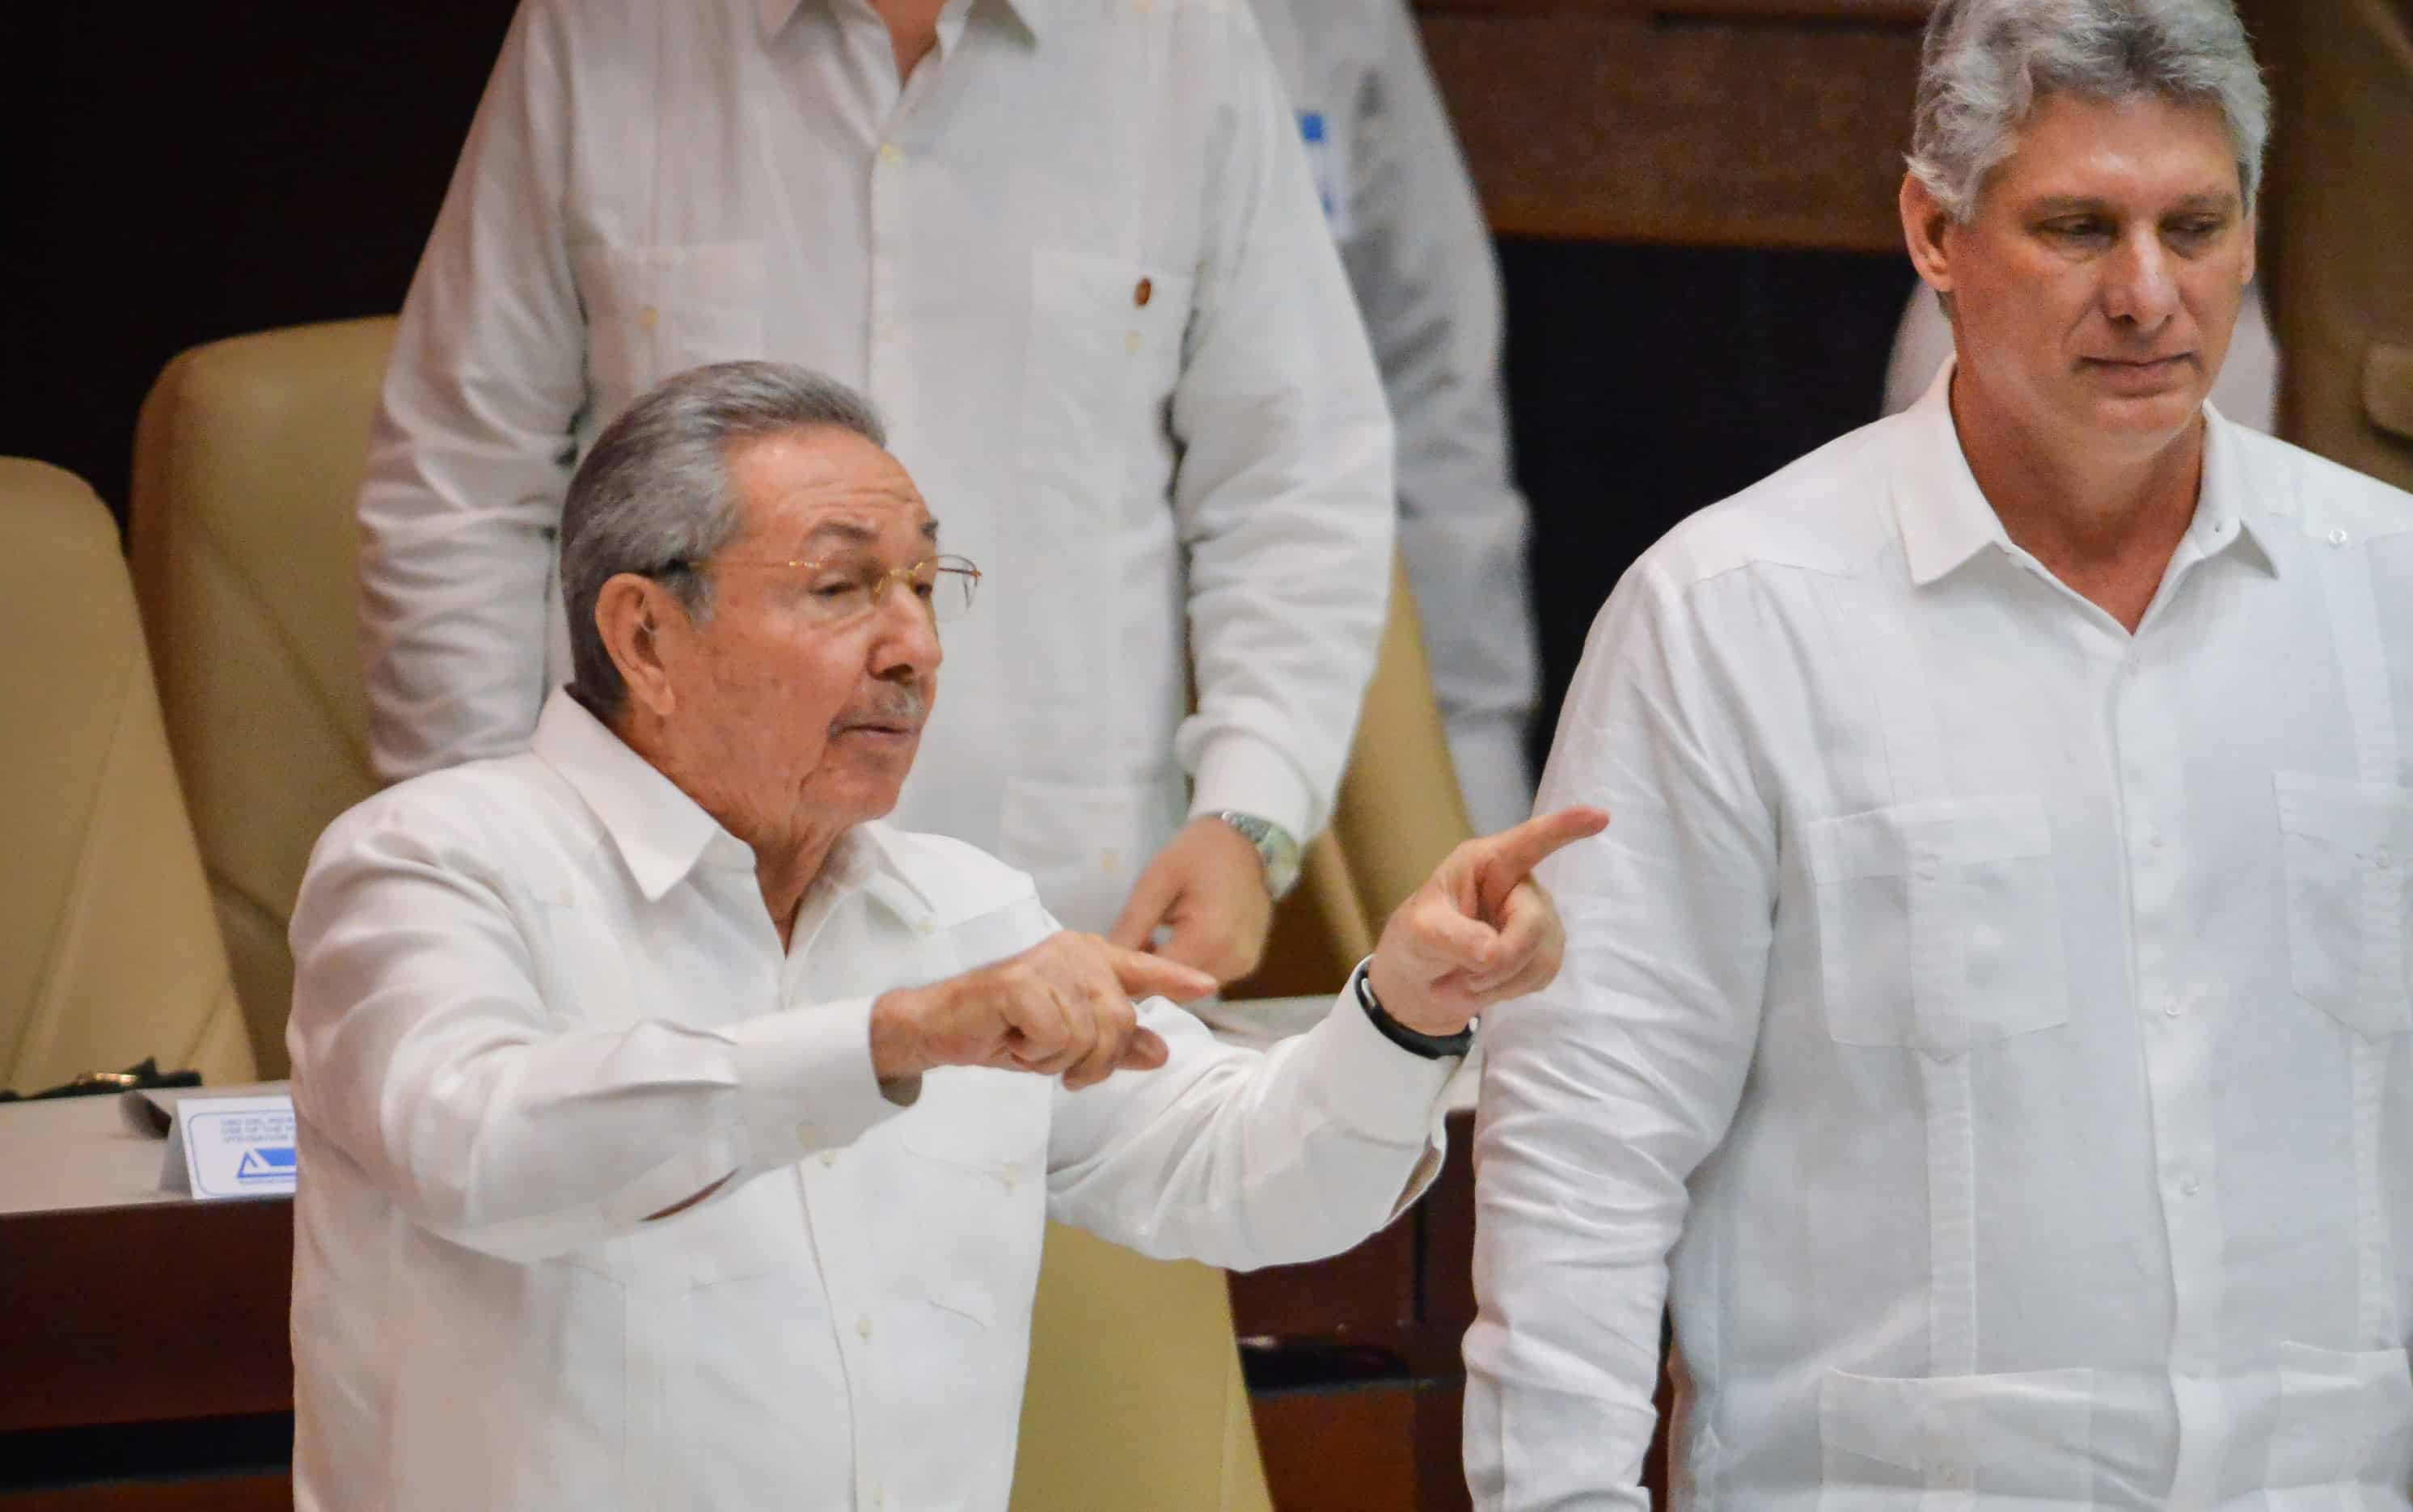 Cuban President Raúl Castro, left, gestures next to first Vice President Miguel Díaz-Canel at the end of the annual session of parliament on Dec. 20, 2014 in Havana.